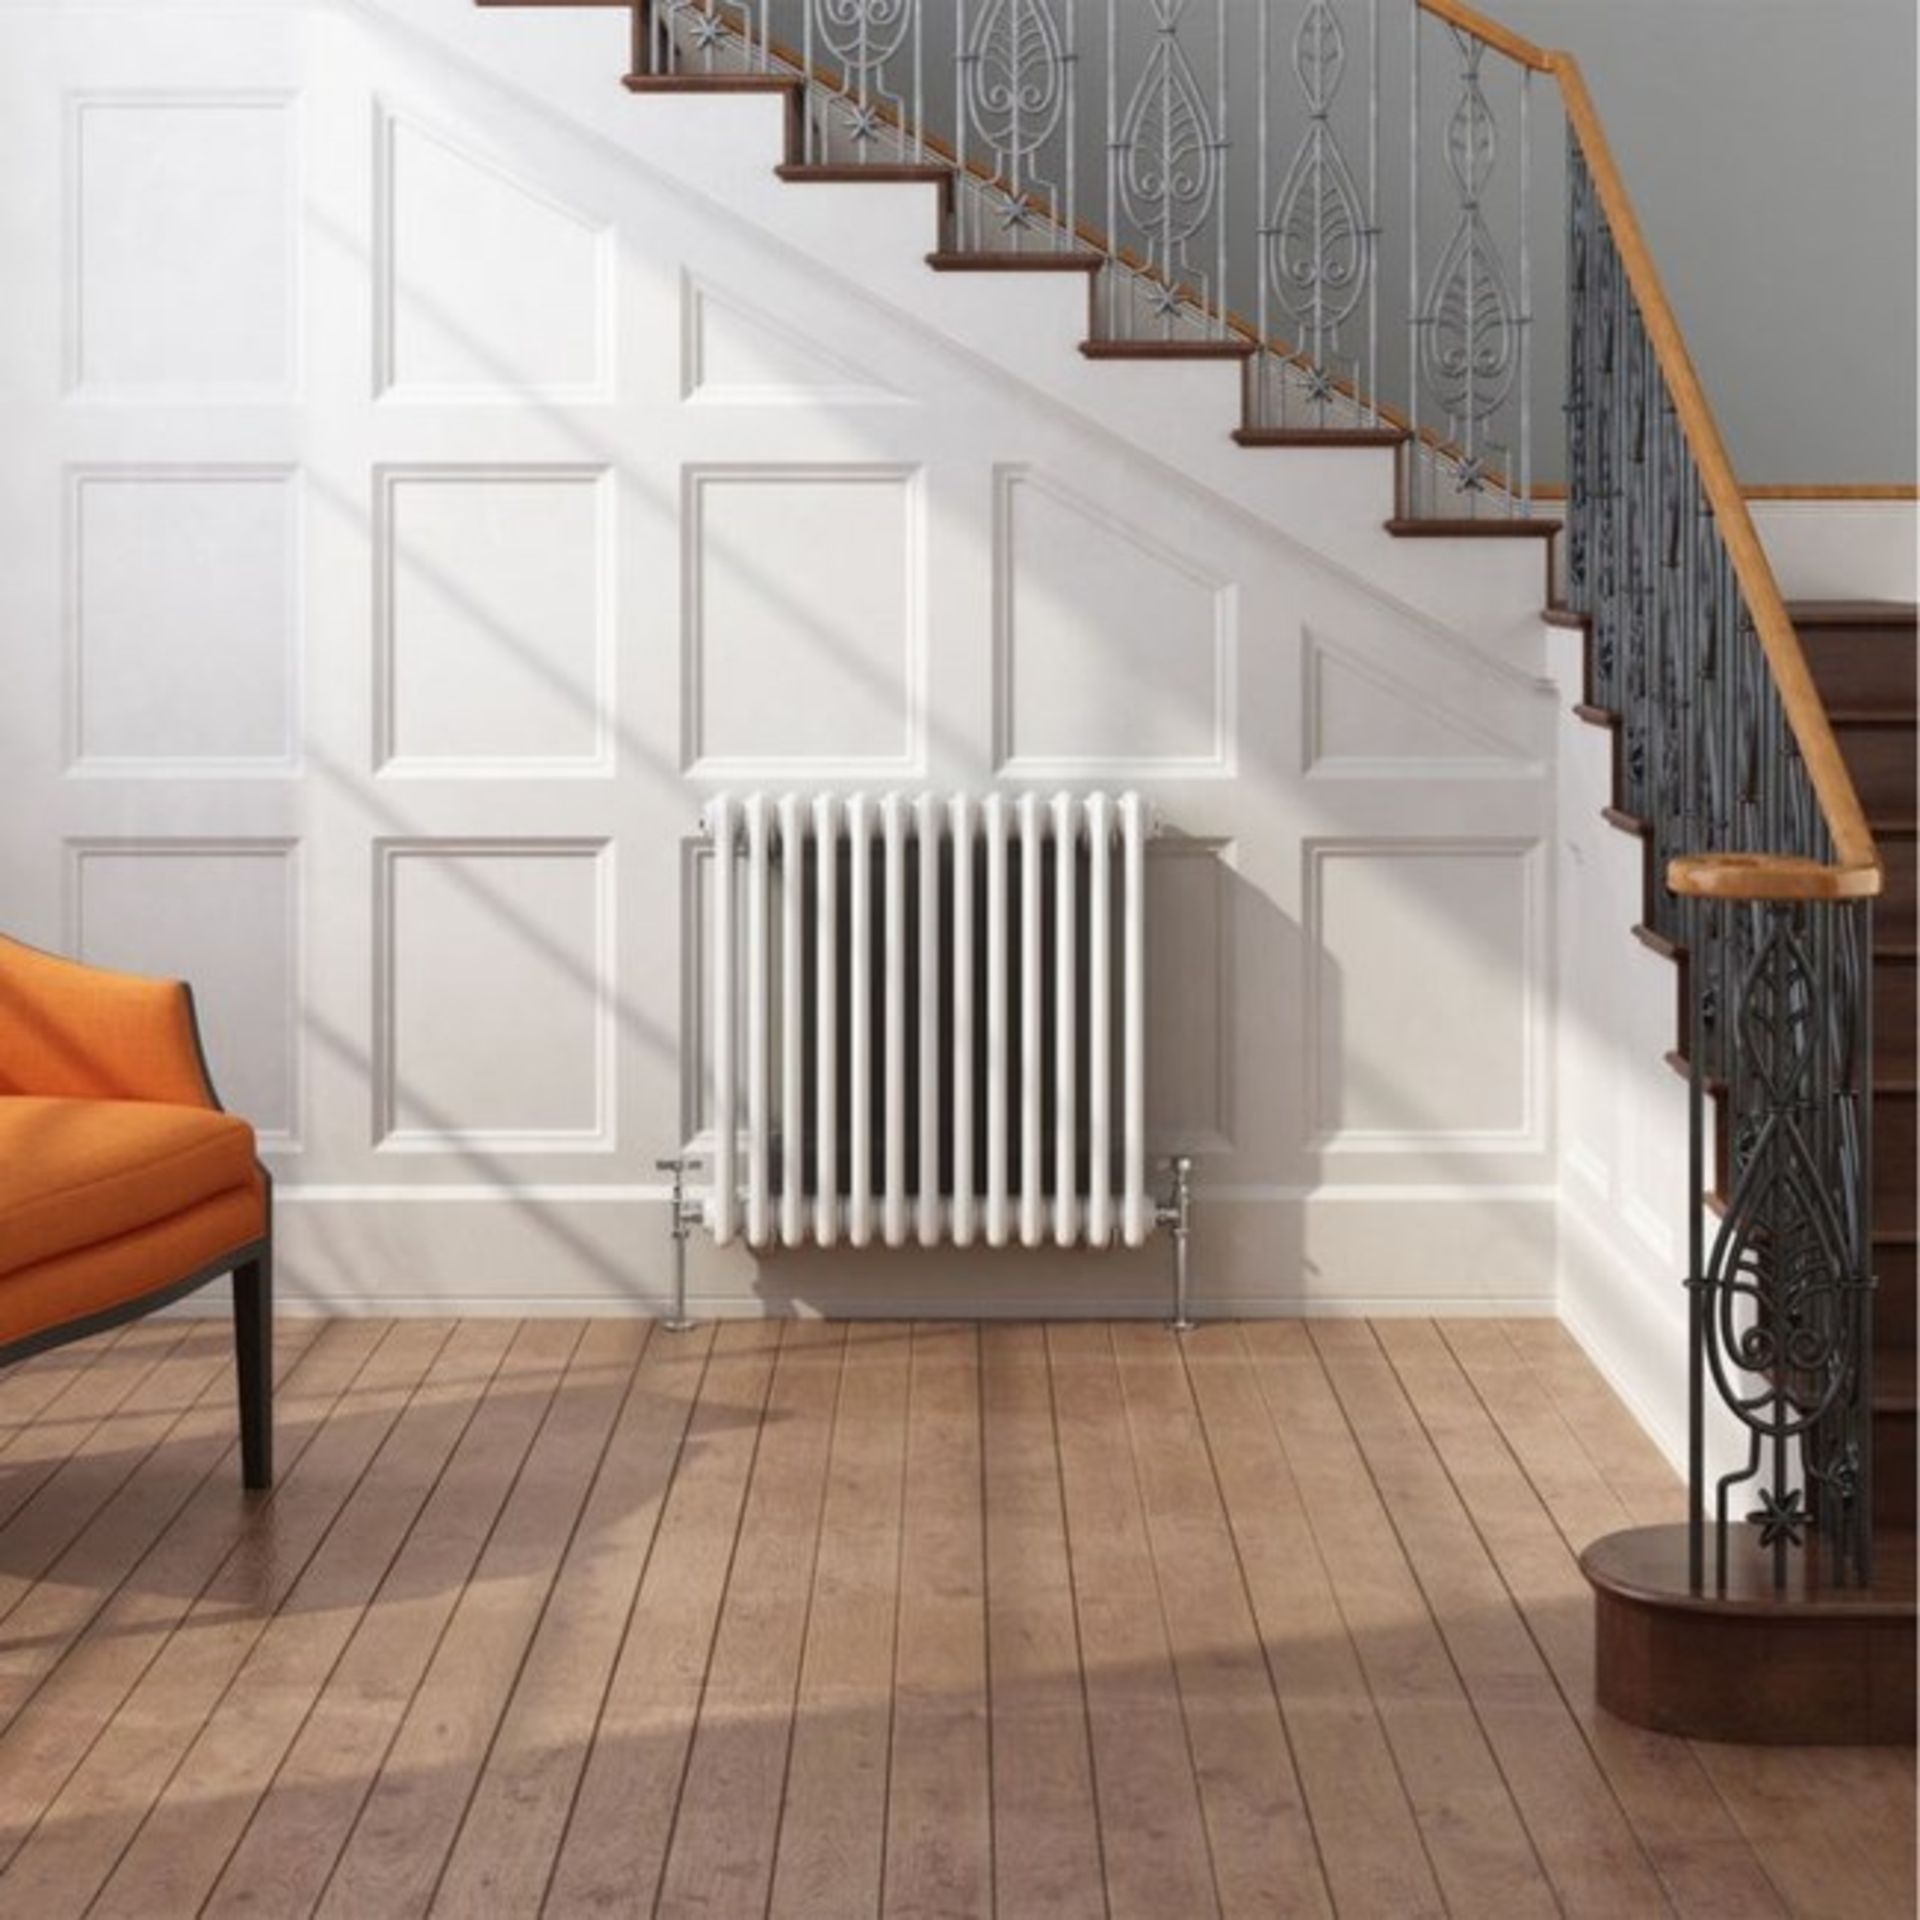 (UR143) 500x628mm White Double Panel Horizontal Colosseum Traditional Radiator. RRP £444.99.F... - Image 2 of 2